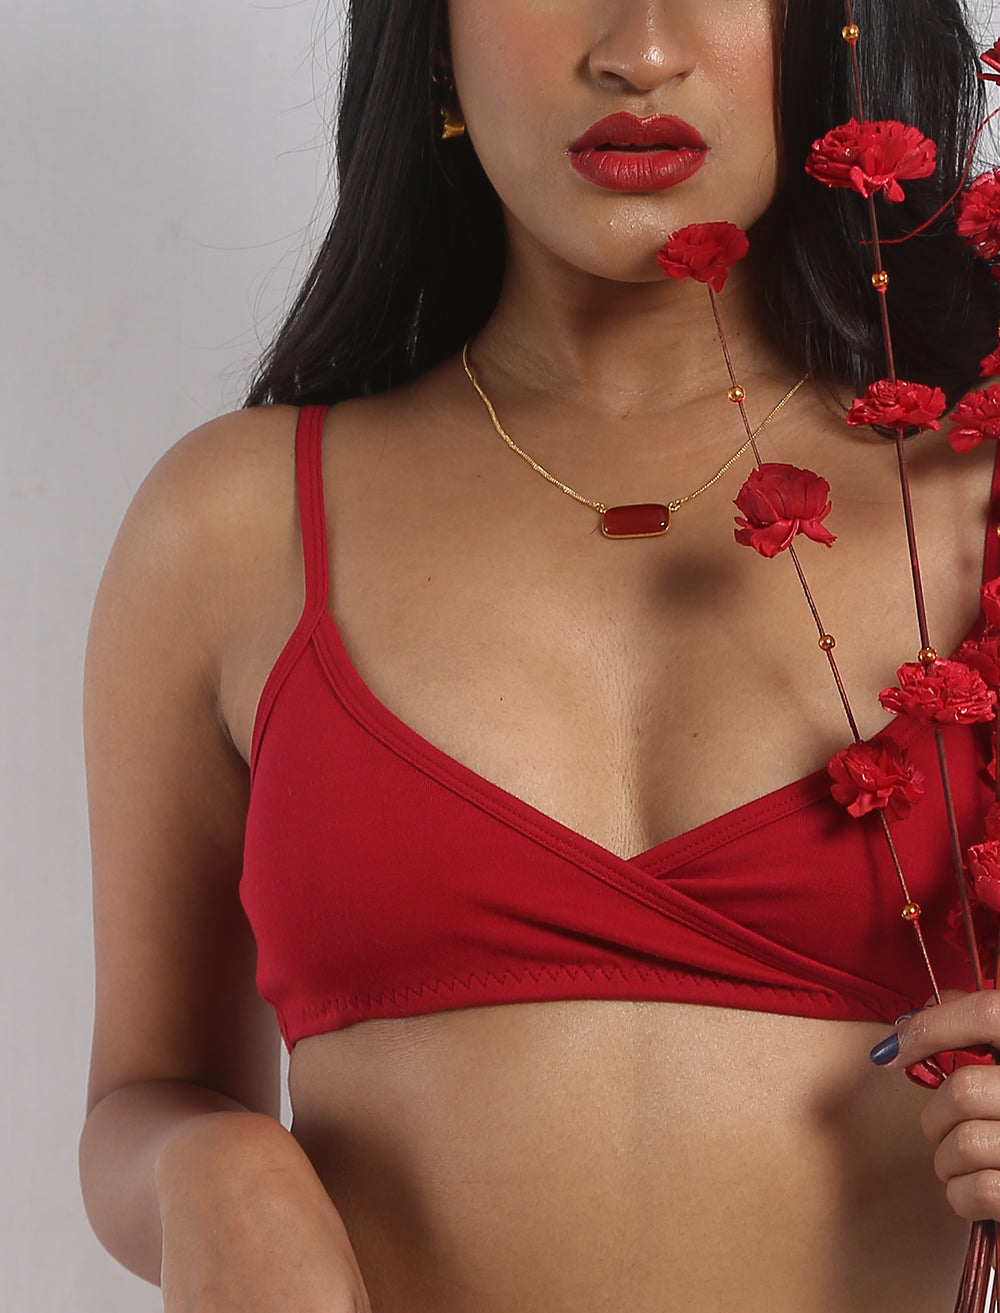 Red Organic Cotton Bralette at Kamakhyaa by Wear Equal. This item is bralette, Bras, Casual Wear, Cotton, Less than $50, lingerie, Natural, Products less than $25, Red, Regular Fit, Solids, Womenswear